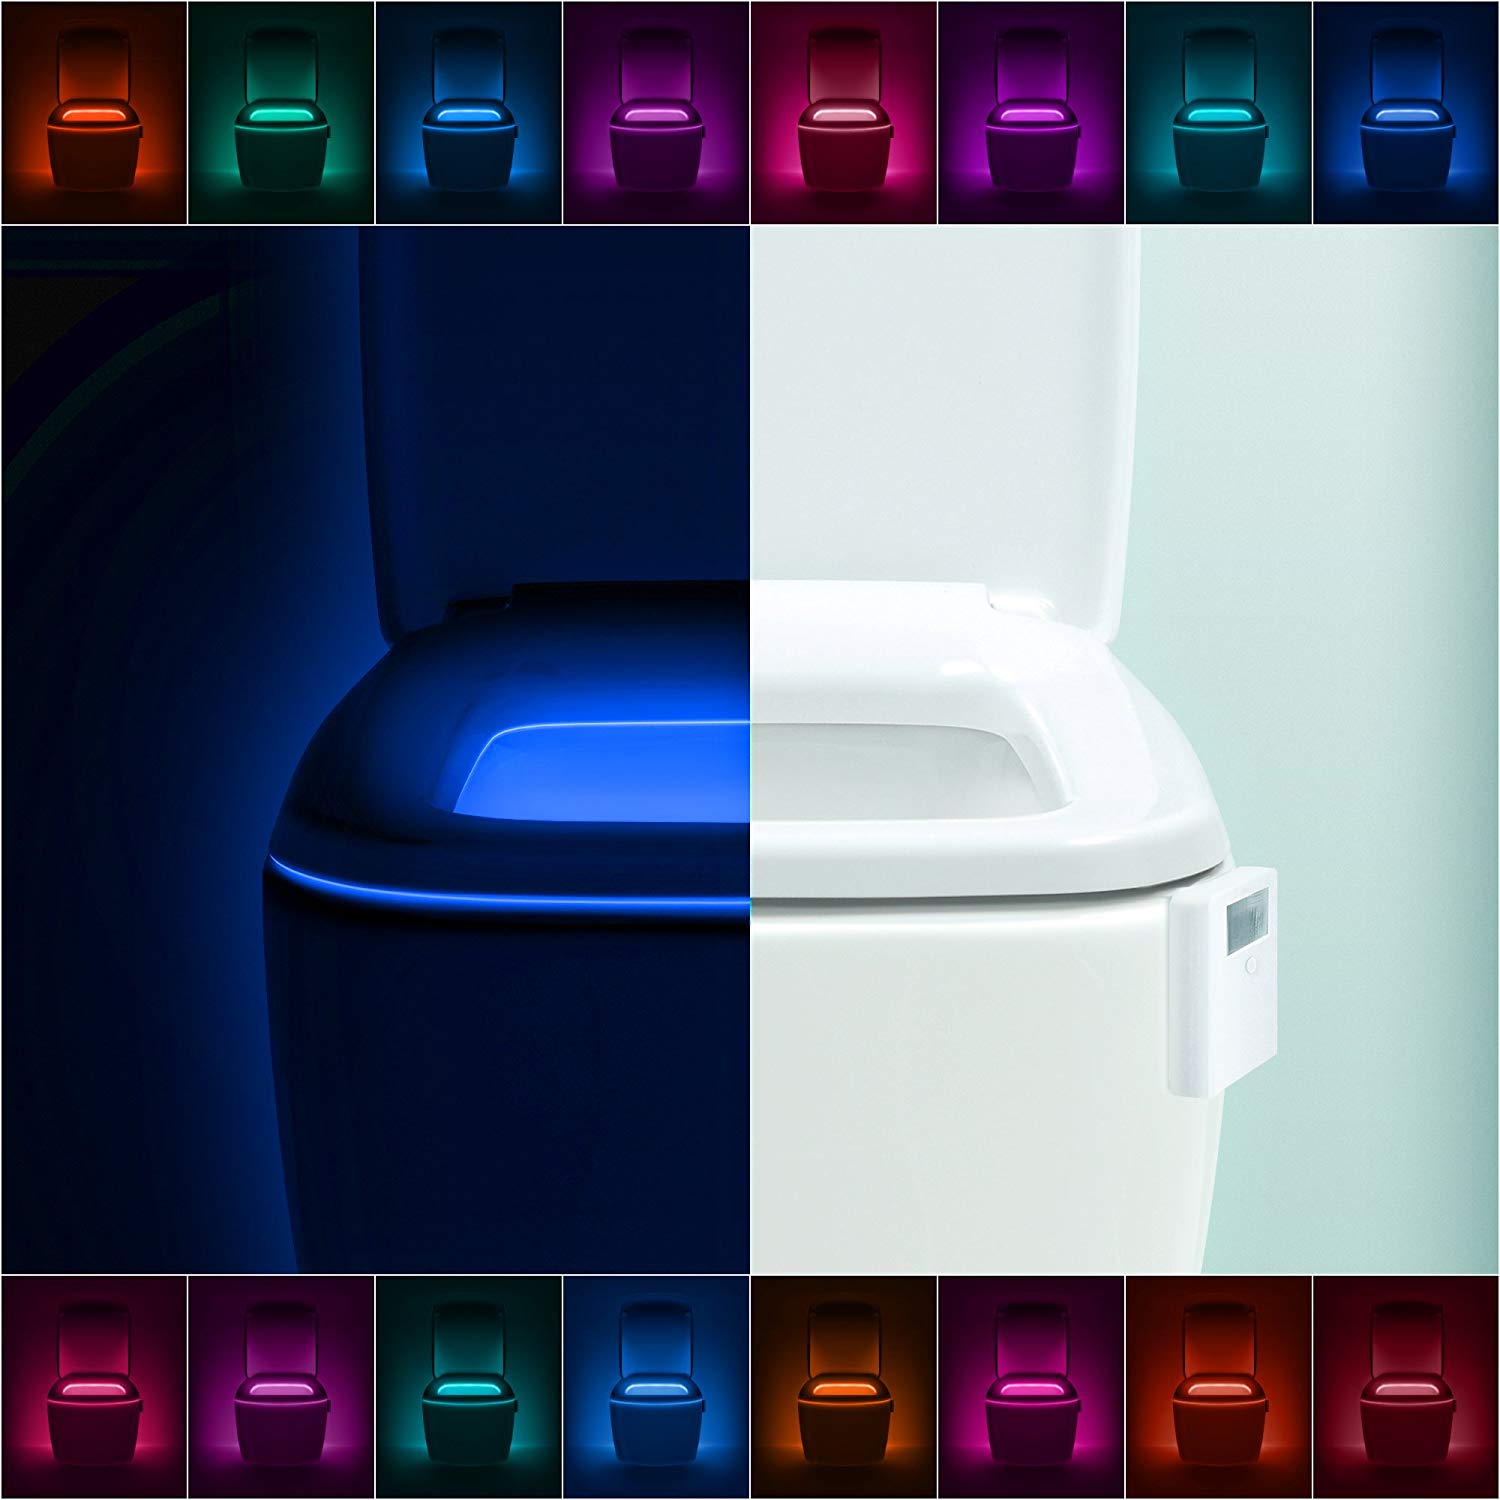 I have never seen such a thing! Glow in the dark toilets for the